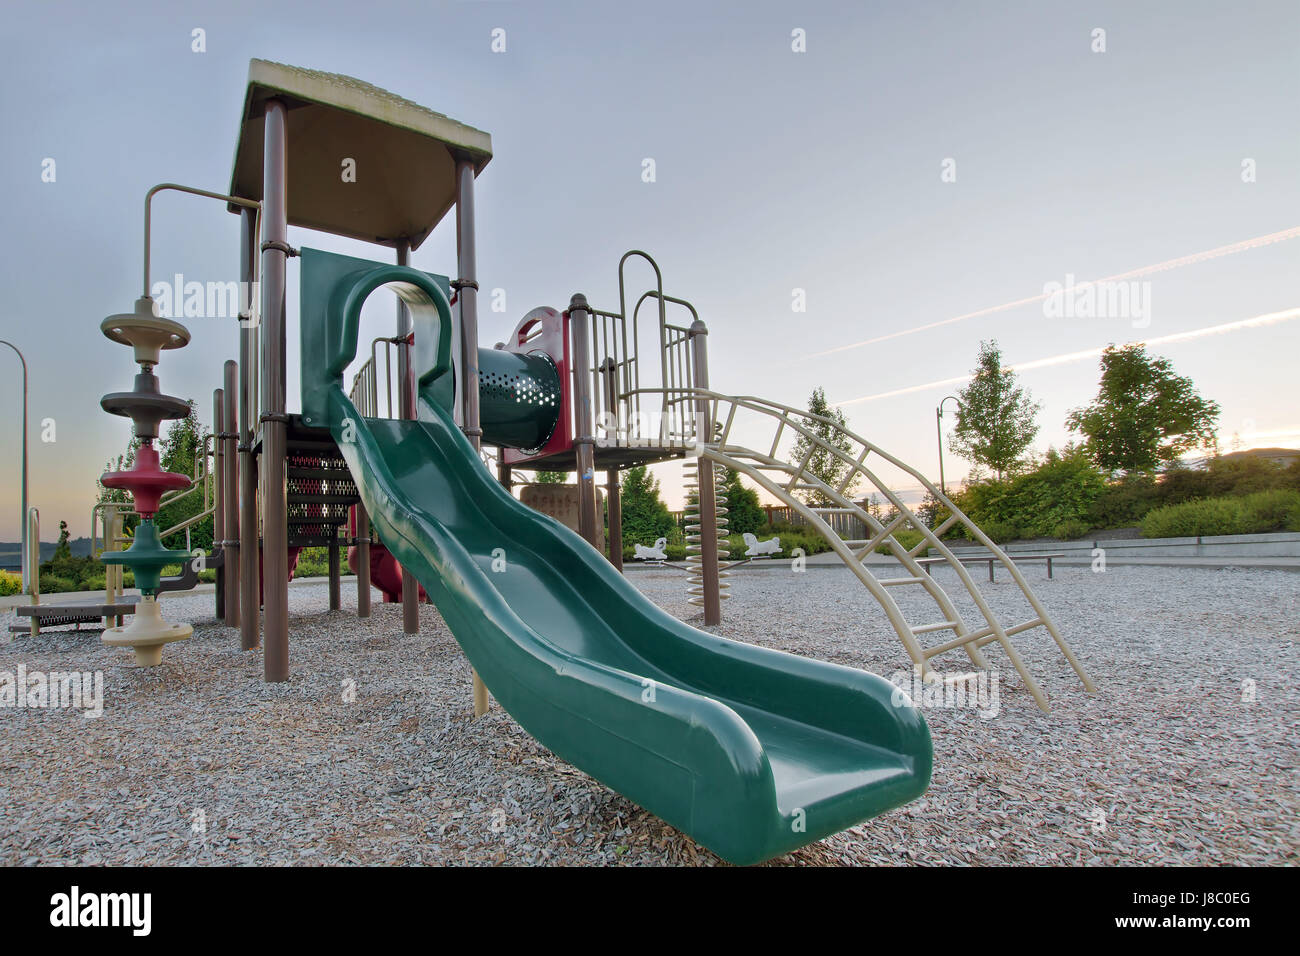 protected, sheltered, equipment, slides, structure, gymnastic, playground, Stock Photo